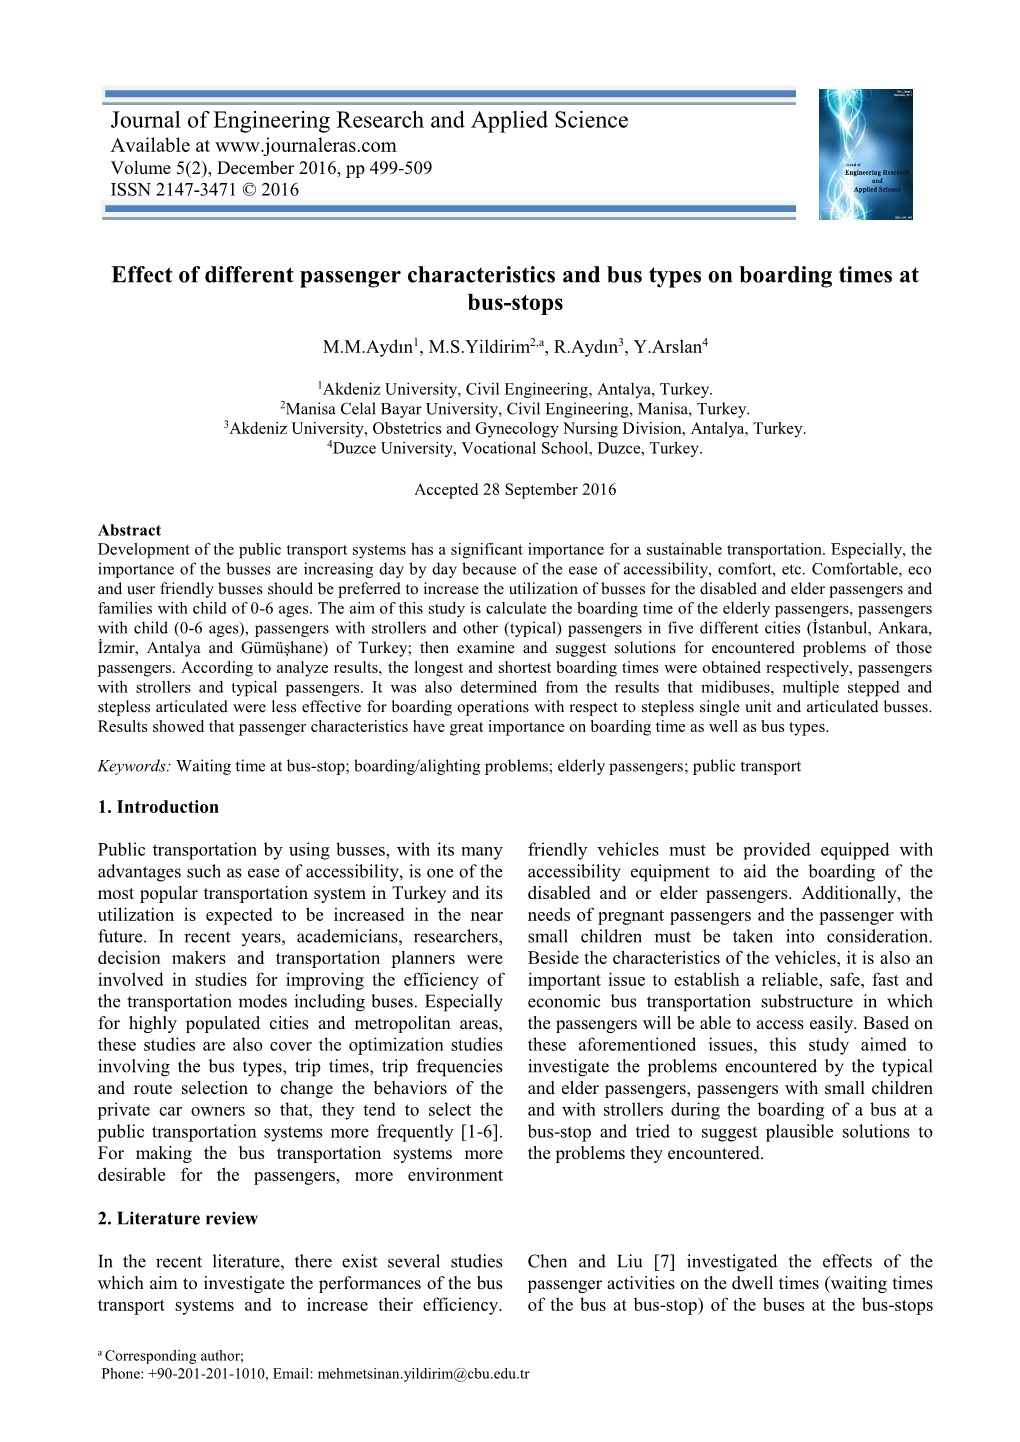 Effect of Different Passenger Characteristics and Bus Types on Boarding Times at Bus-Stops